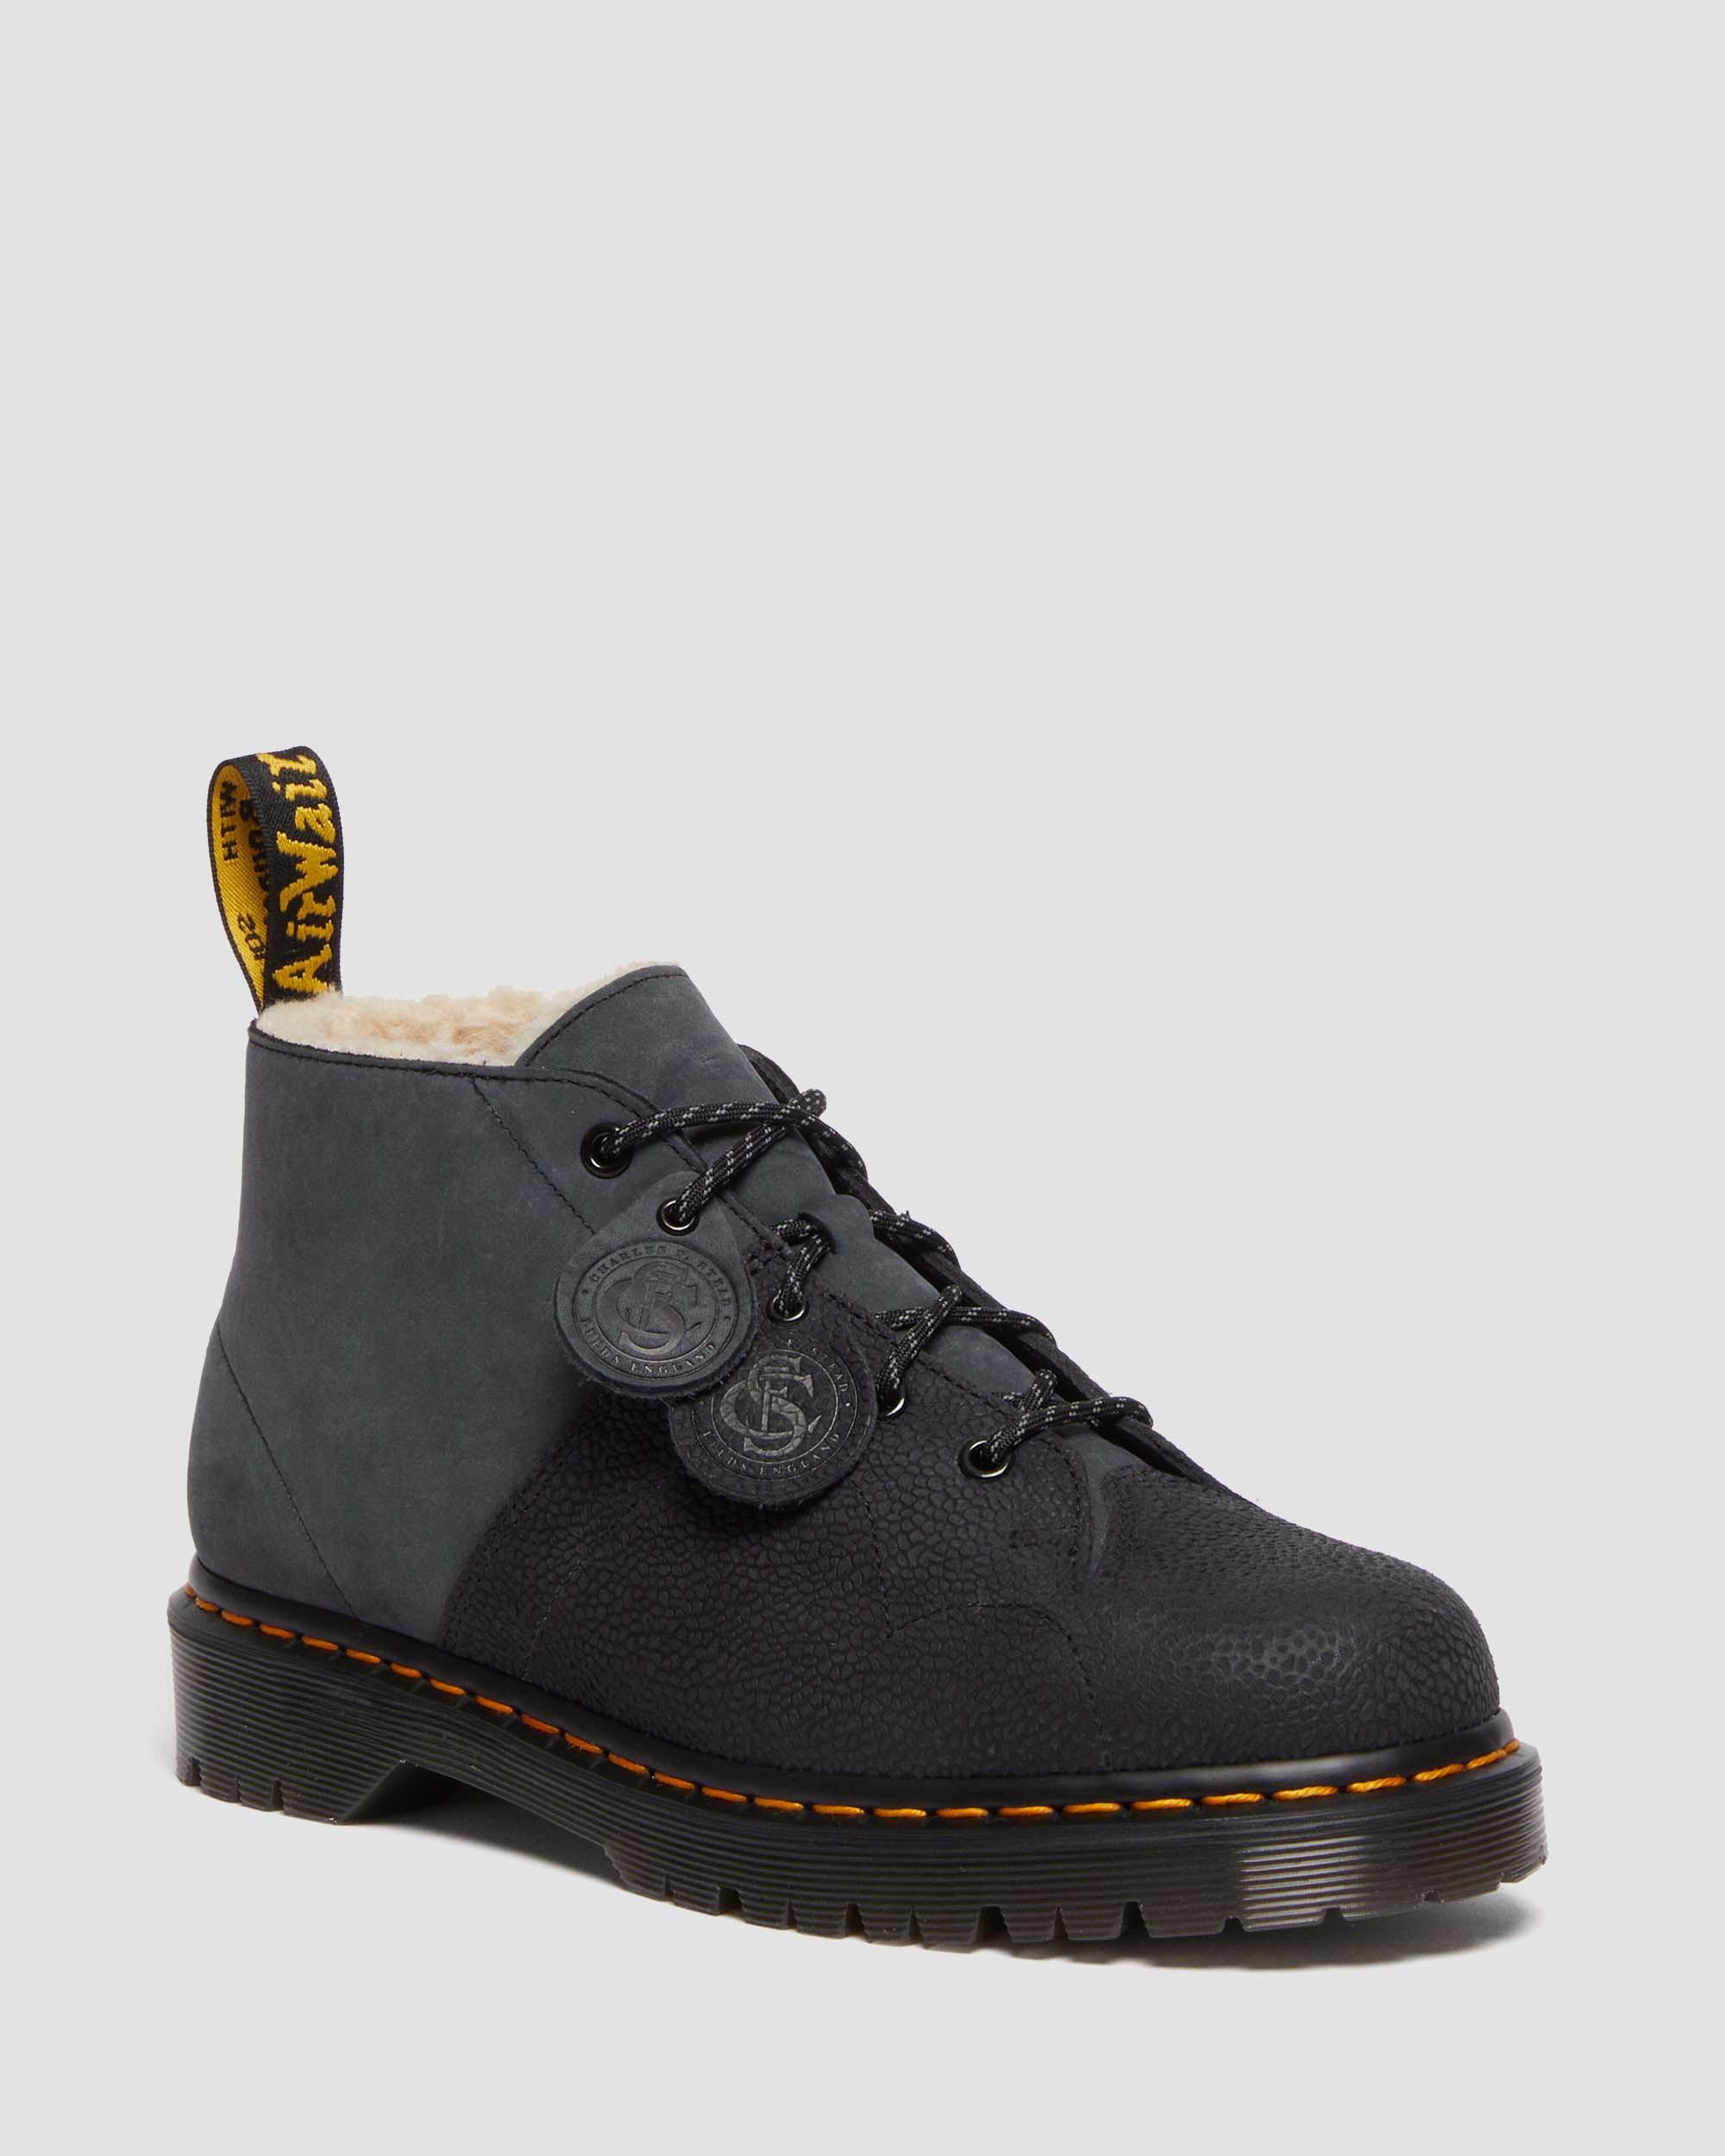 Church Nubuck Leather Ankle Boots in BLACK